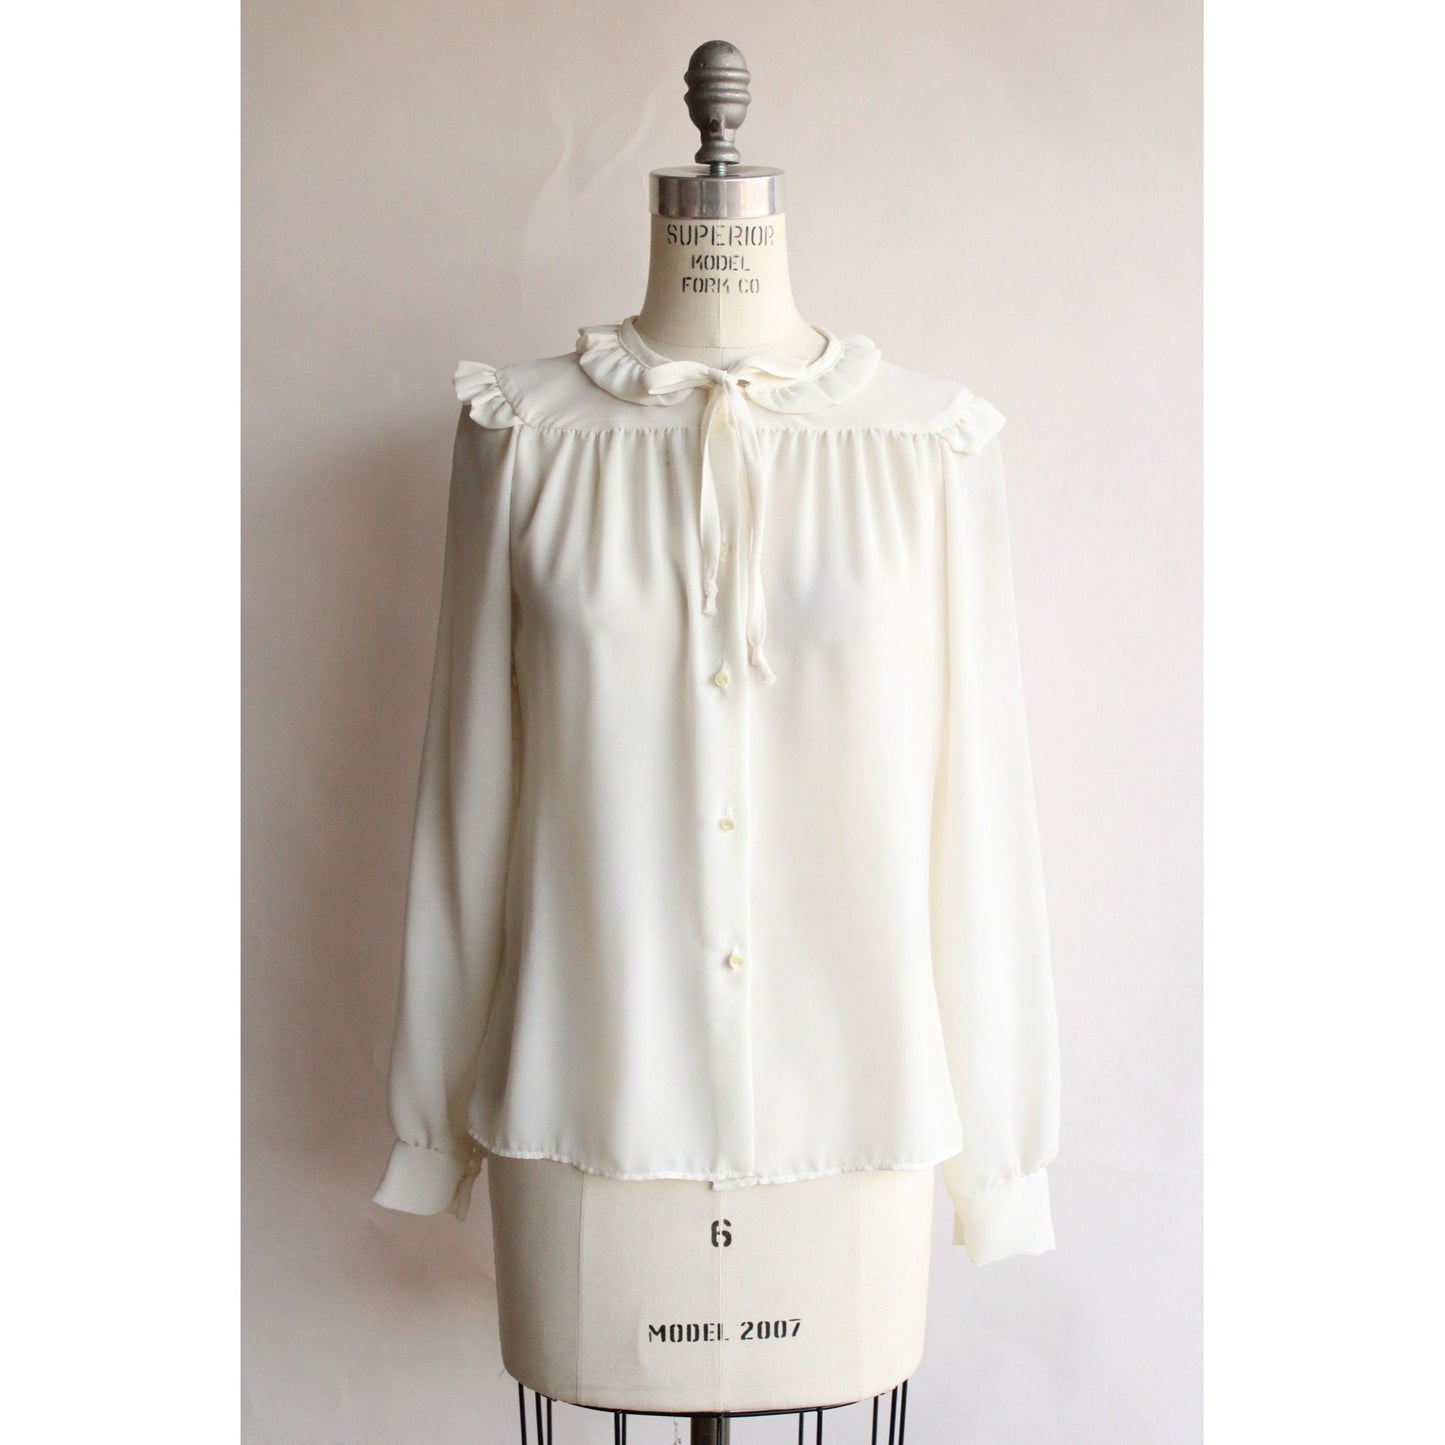 Vintage 1980s Blouse with Kitty Bow and Ruffled Collar